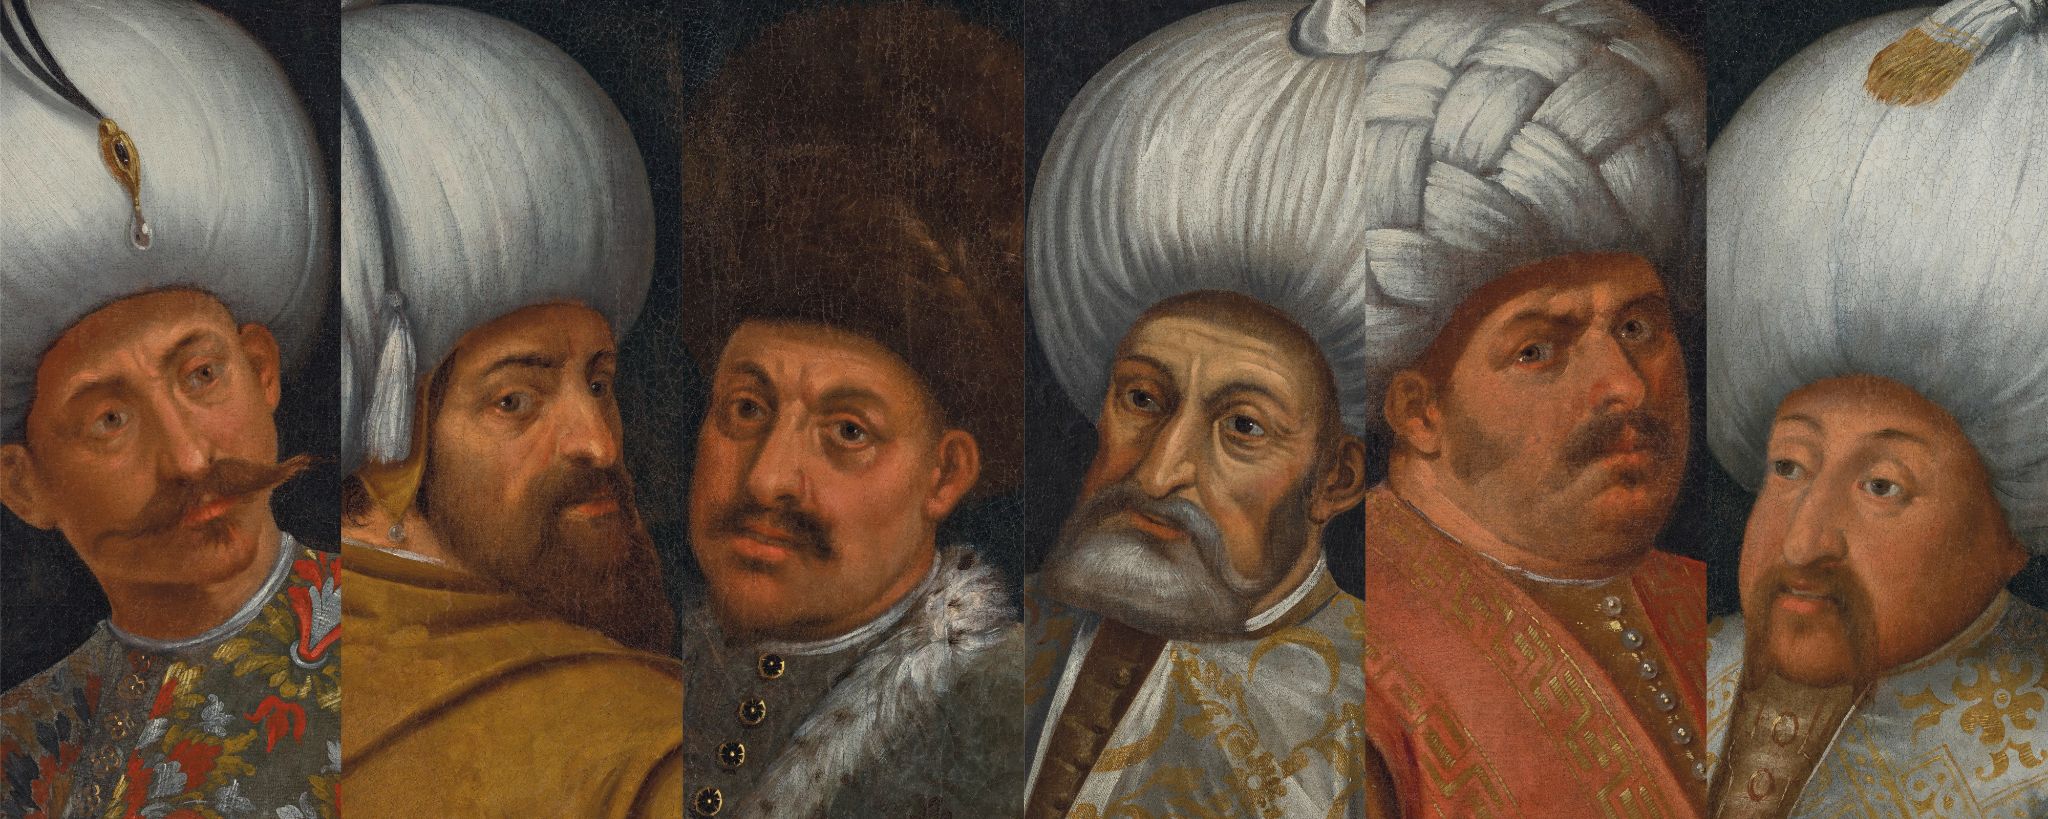 '[The portraits] are witness to the Grand Vizier’s efforts to create a dynastic portrait gallery,' says Islamic art expert Dr Julian Raby (Christie's Images 2021)